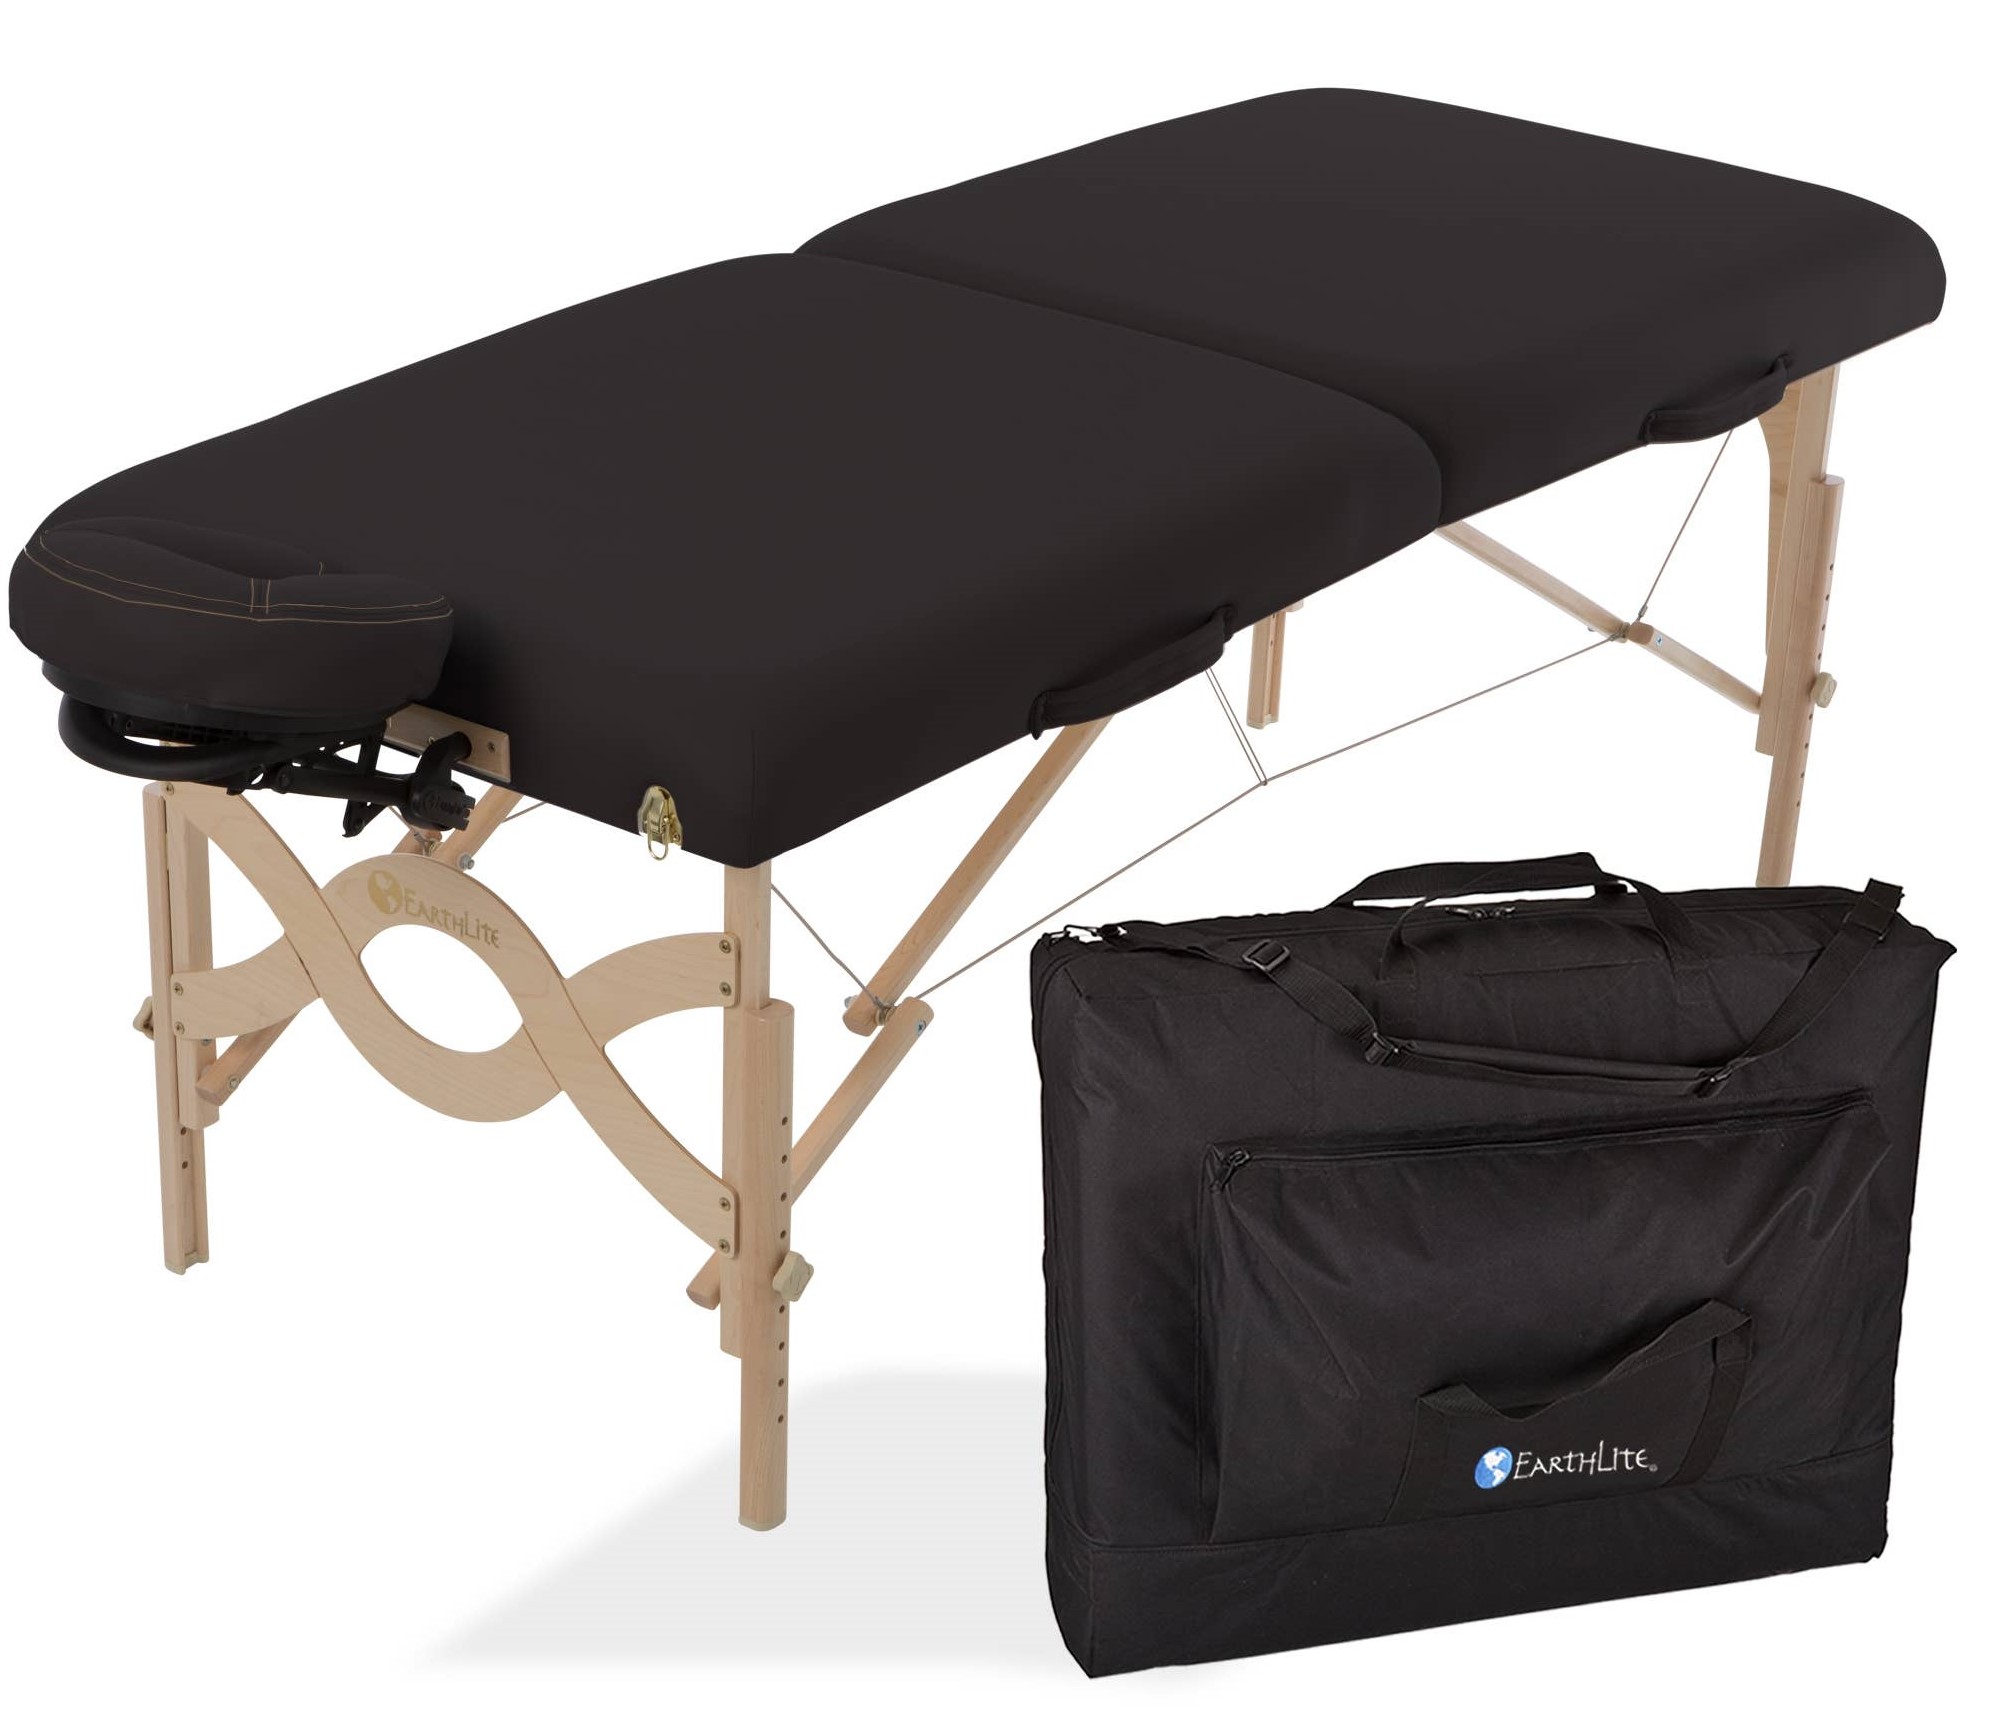 Earthlite Avalon XD Portable Massage Table Package - 3000 lbs. static weight & 750 lbs. working weight